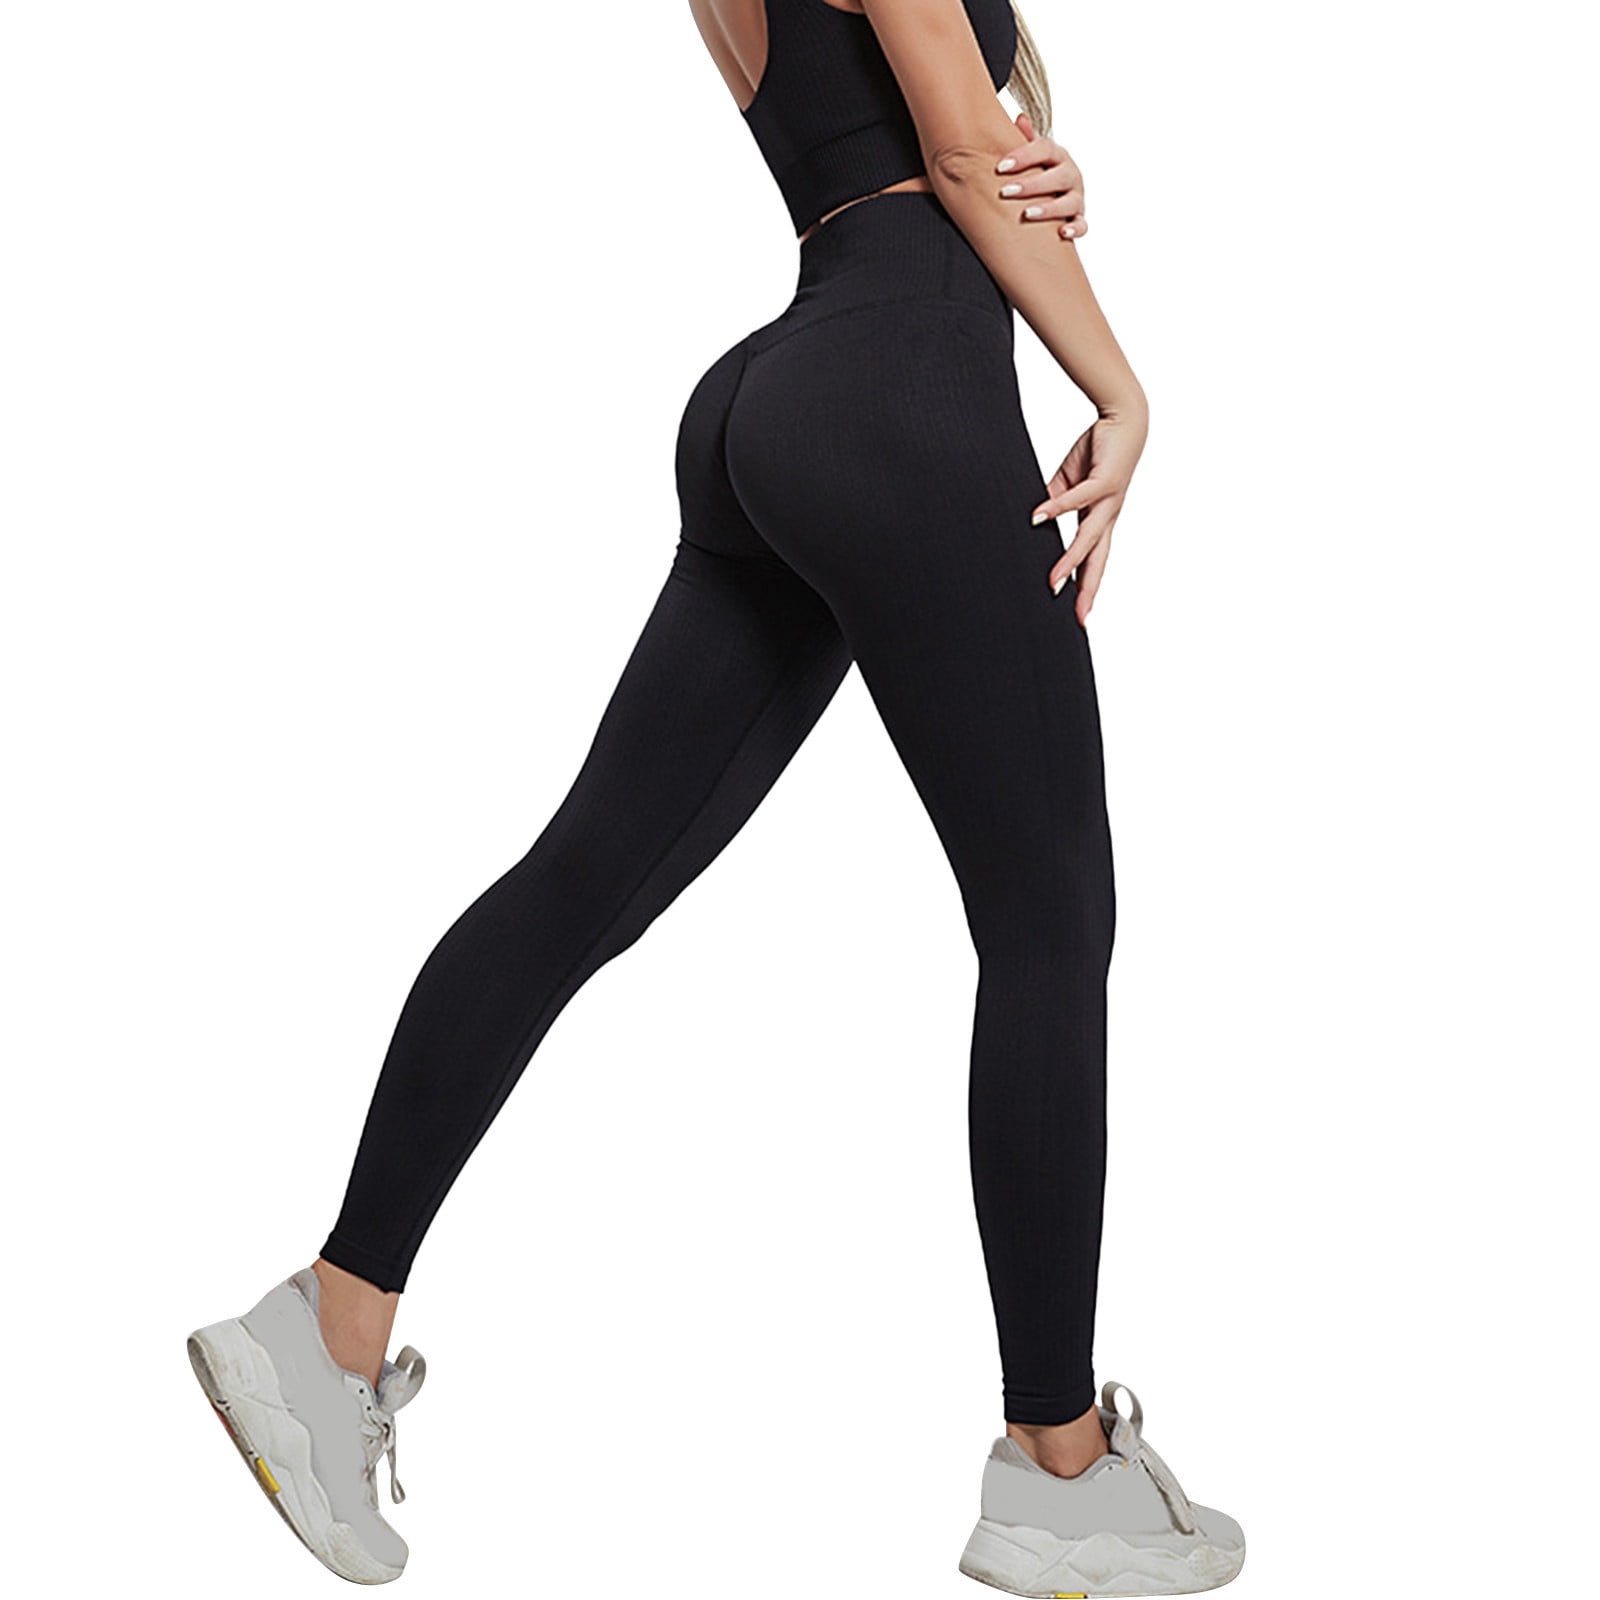 Aayomet Yoga Pants For Women Bootcut Women's Mesh Yoga Pants with 2  Pockets, Non See-Through High Waist Tummy Control 11 Way Stretch Leggings, Black M 